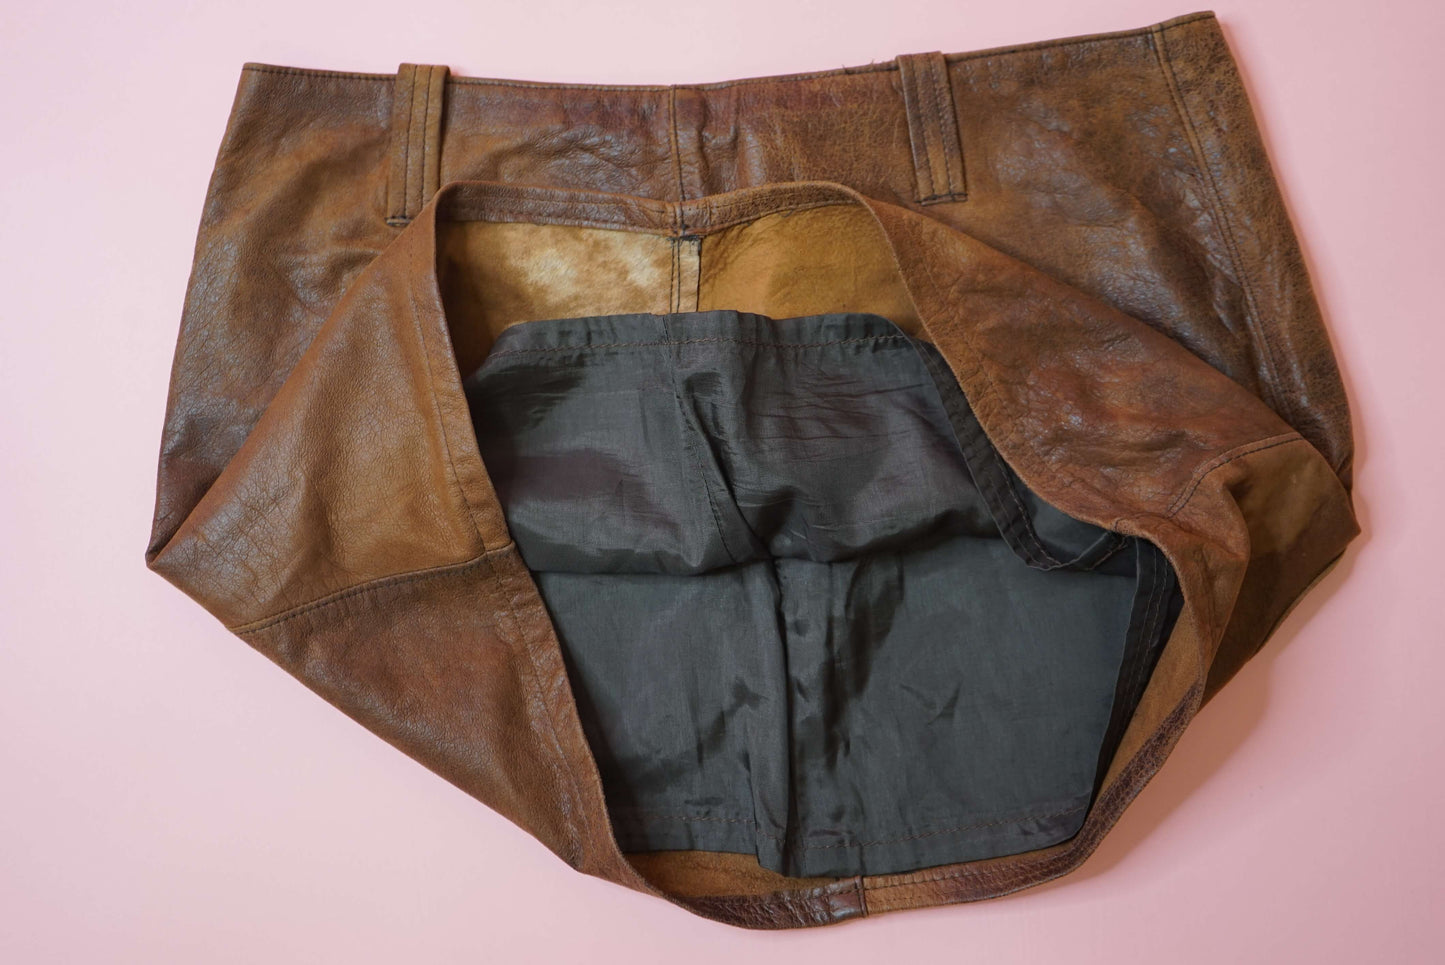 Vintage Brown Faded Leather Mini Skirt With Pockets Size W27-28 S